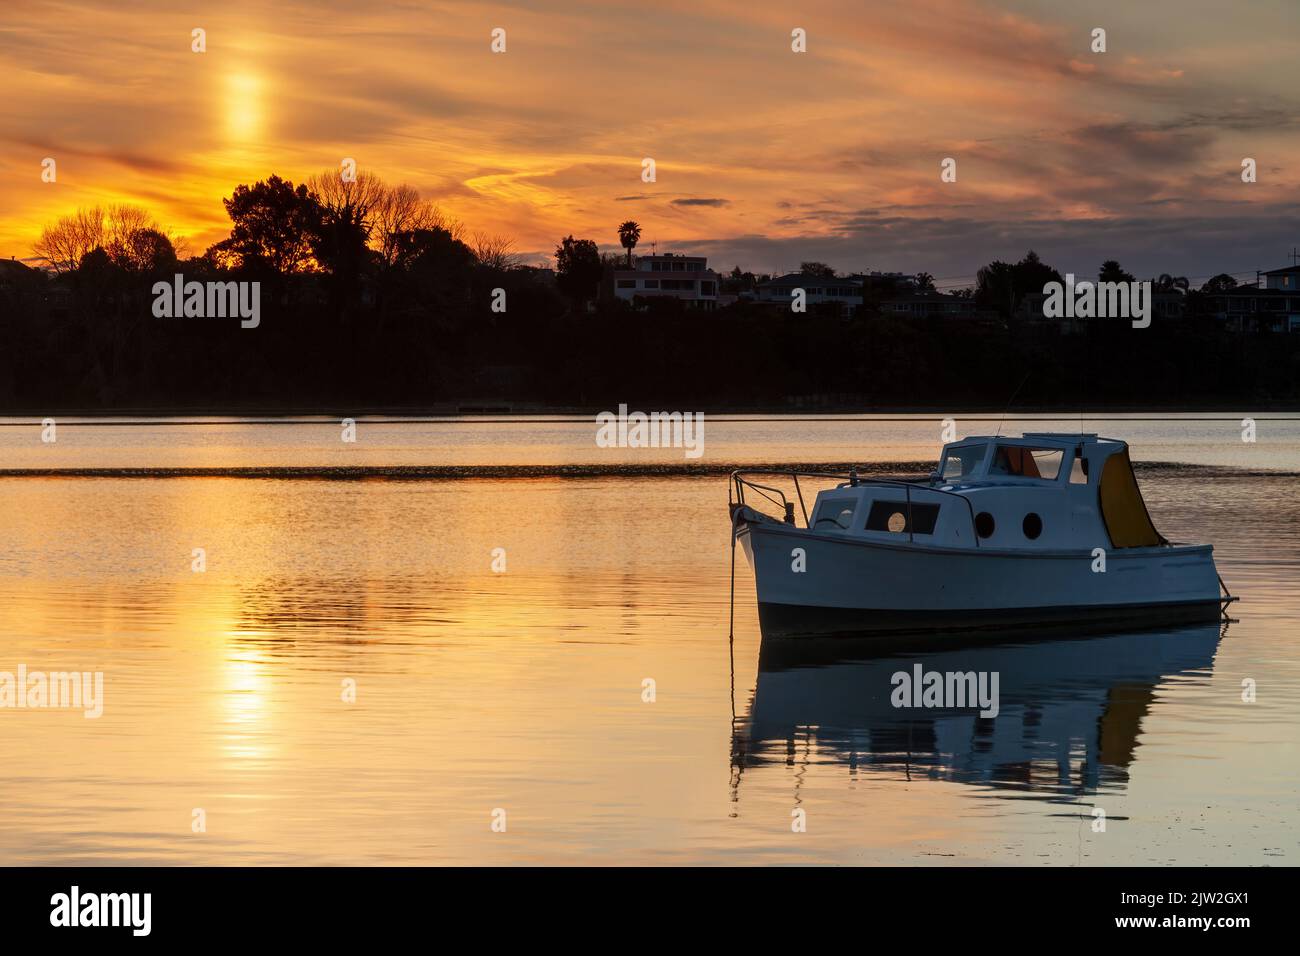 A small boat on the tranquil waters of a harbor at sunset Stock Photo